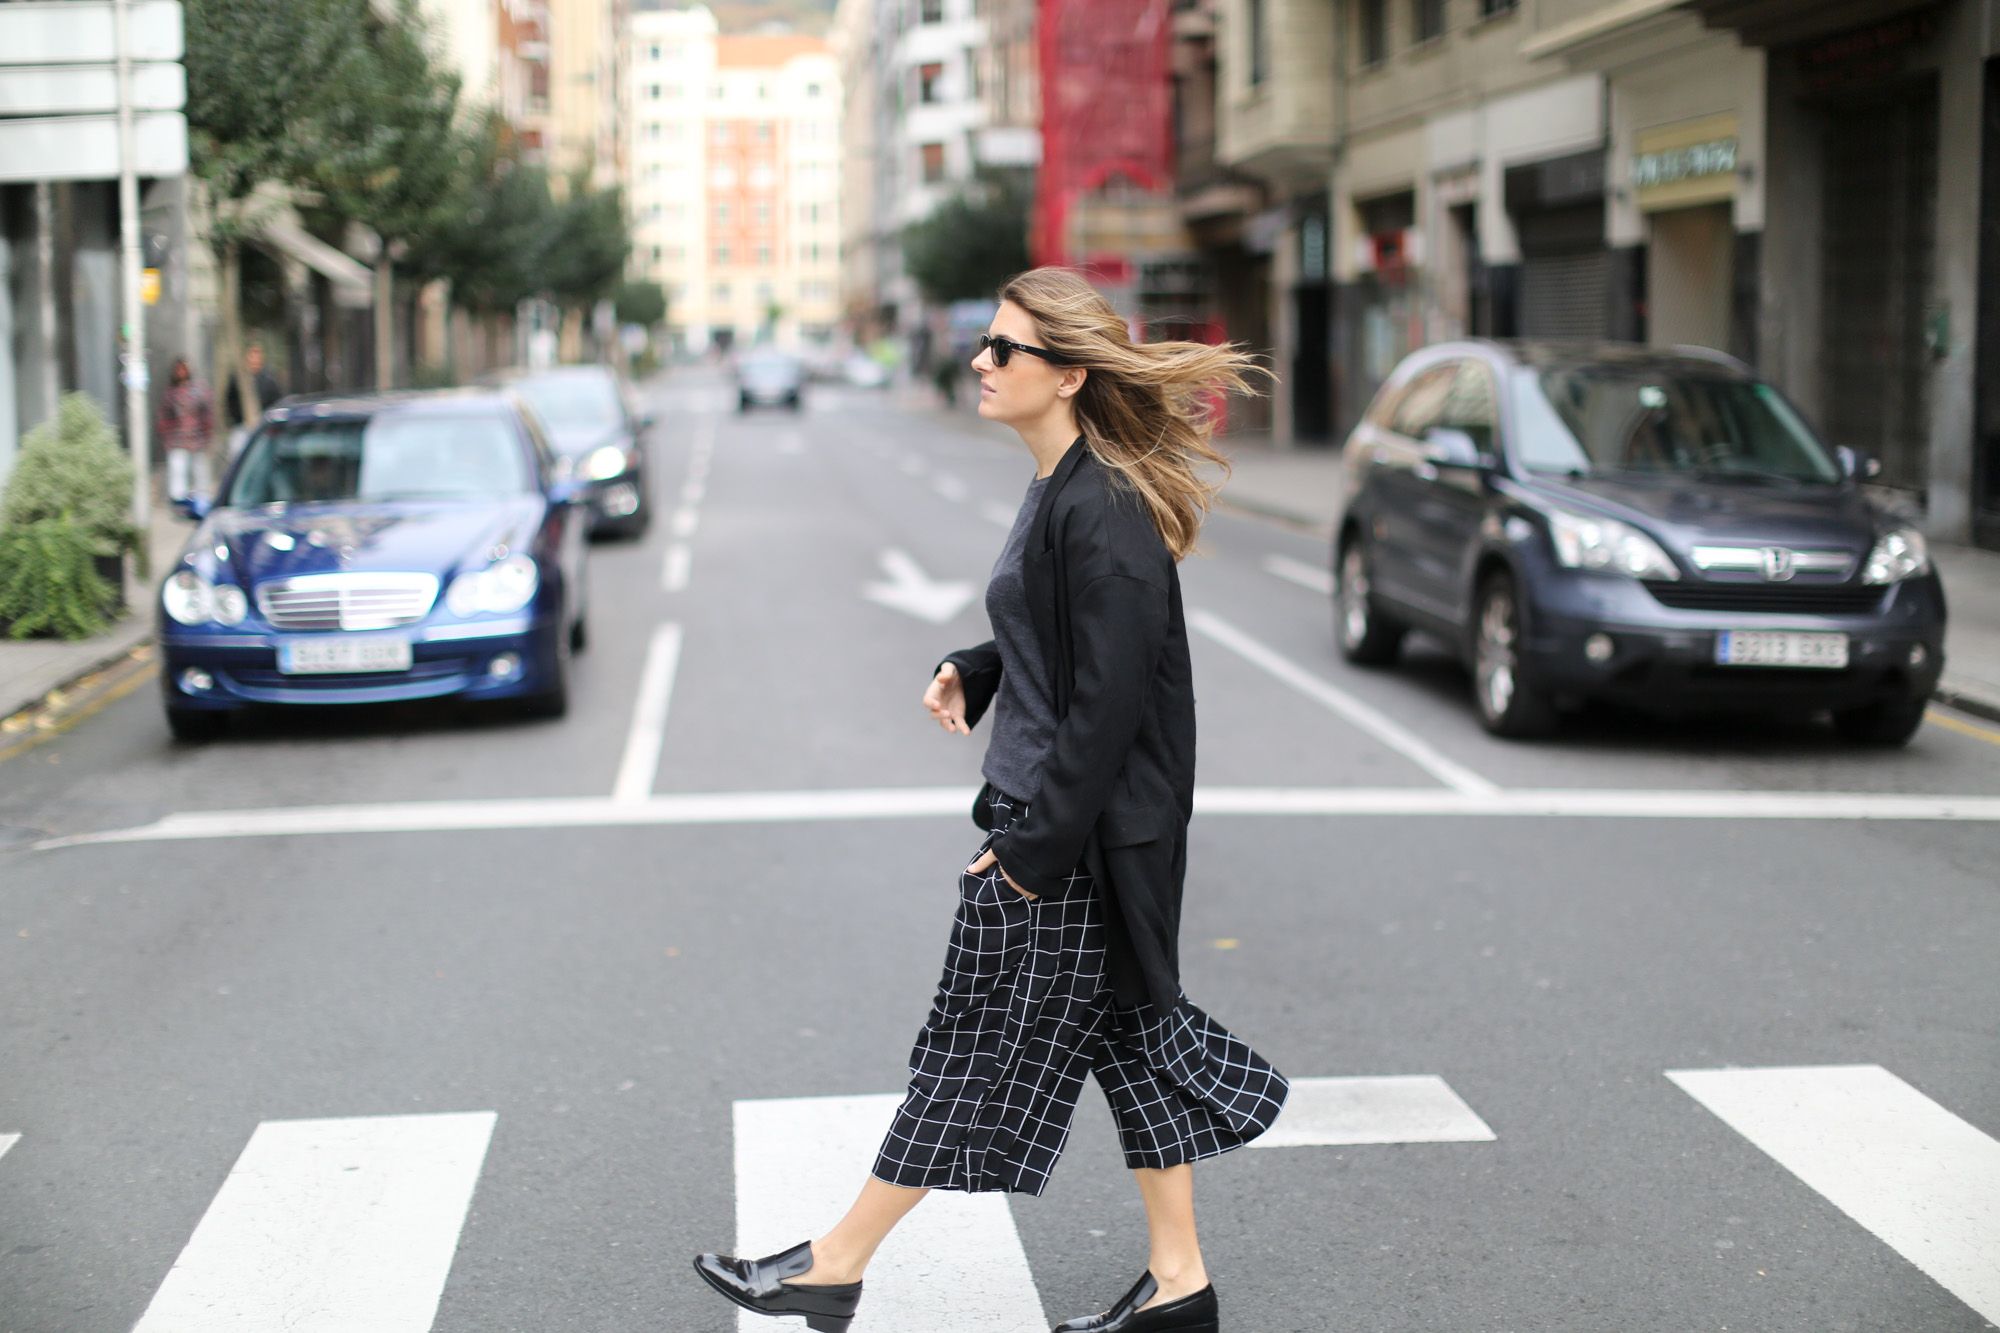 clochet-streetstyle-monki-squared-black-white-culottes-lykke-li-and-other-stories-loafers-71595f0e7ade3e8993c96c3f509a39d4.jpg